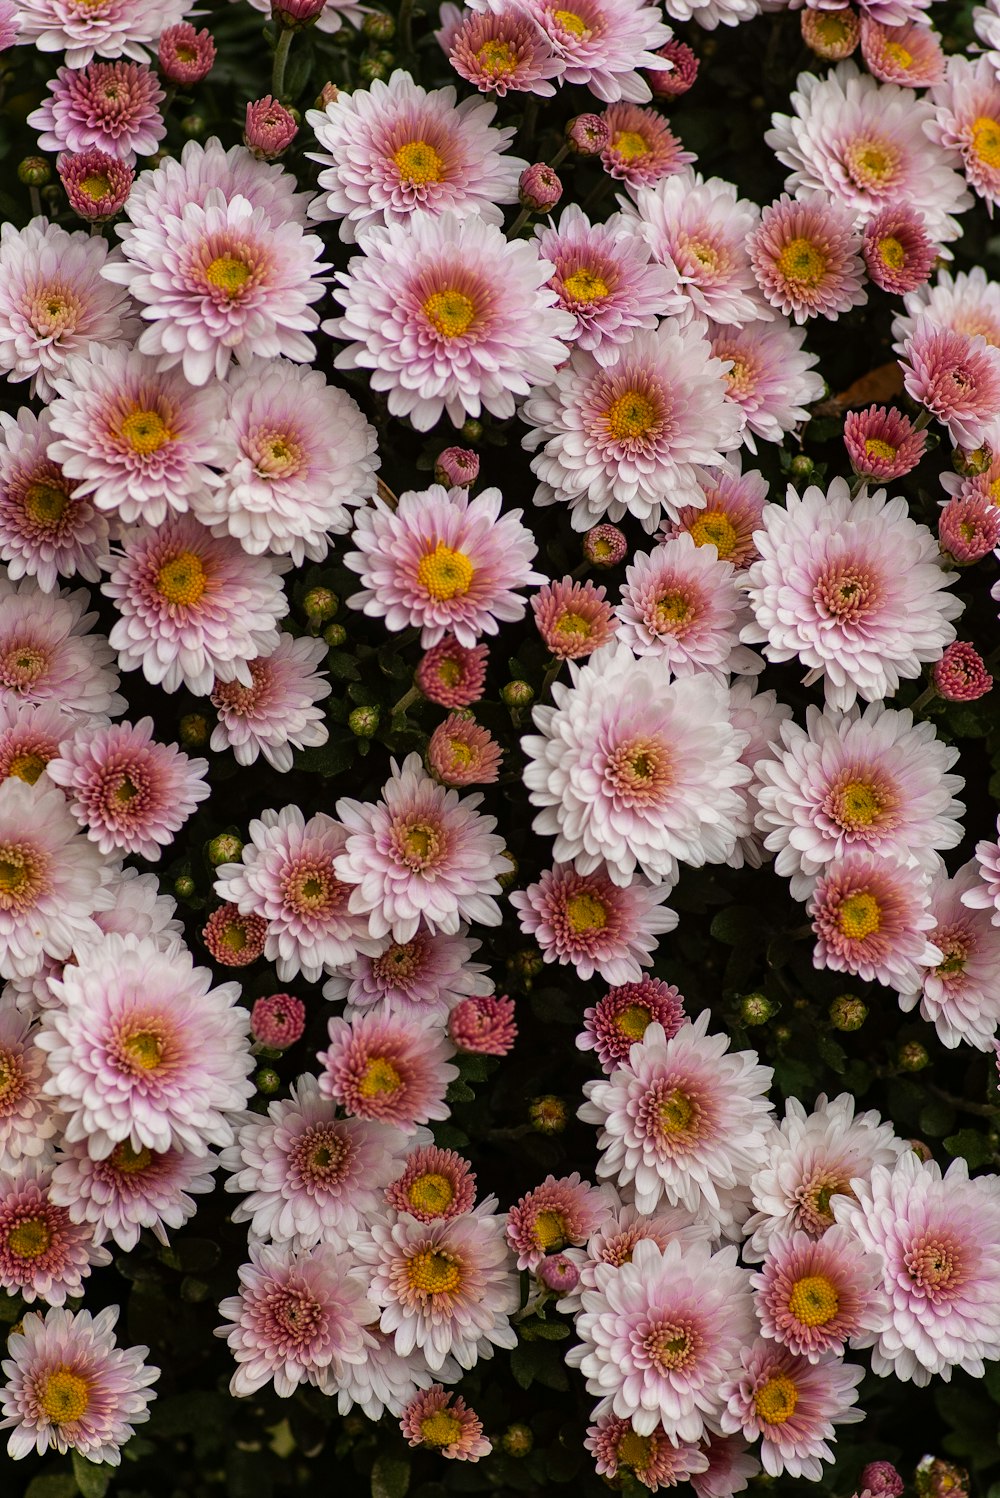 white-and-pink petaled flwoers